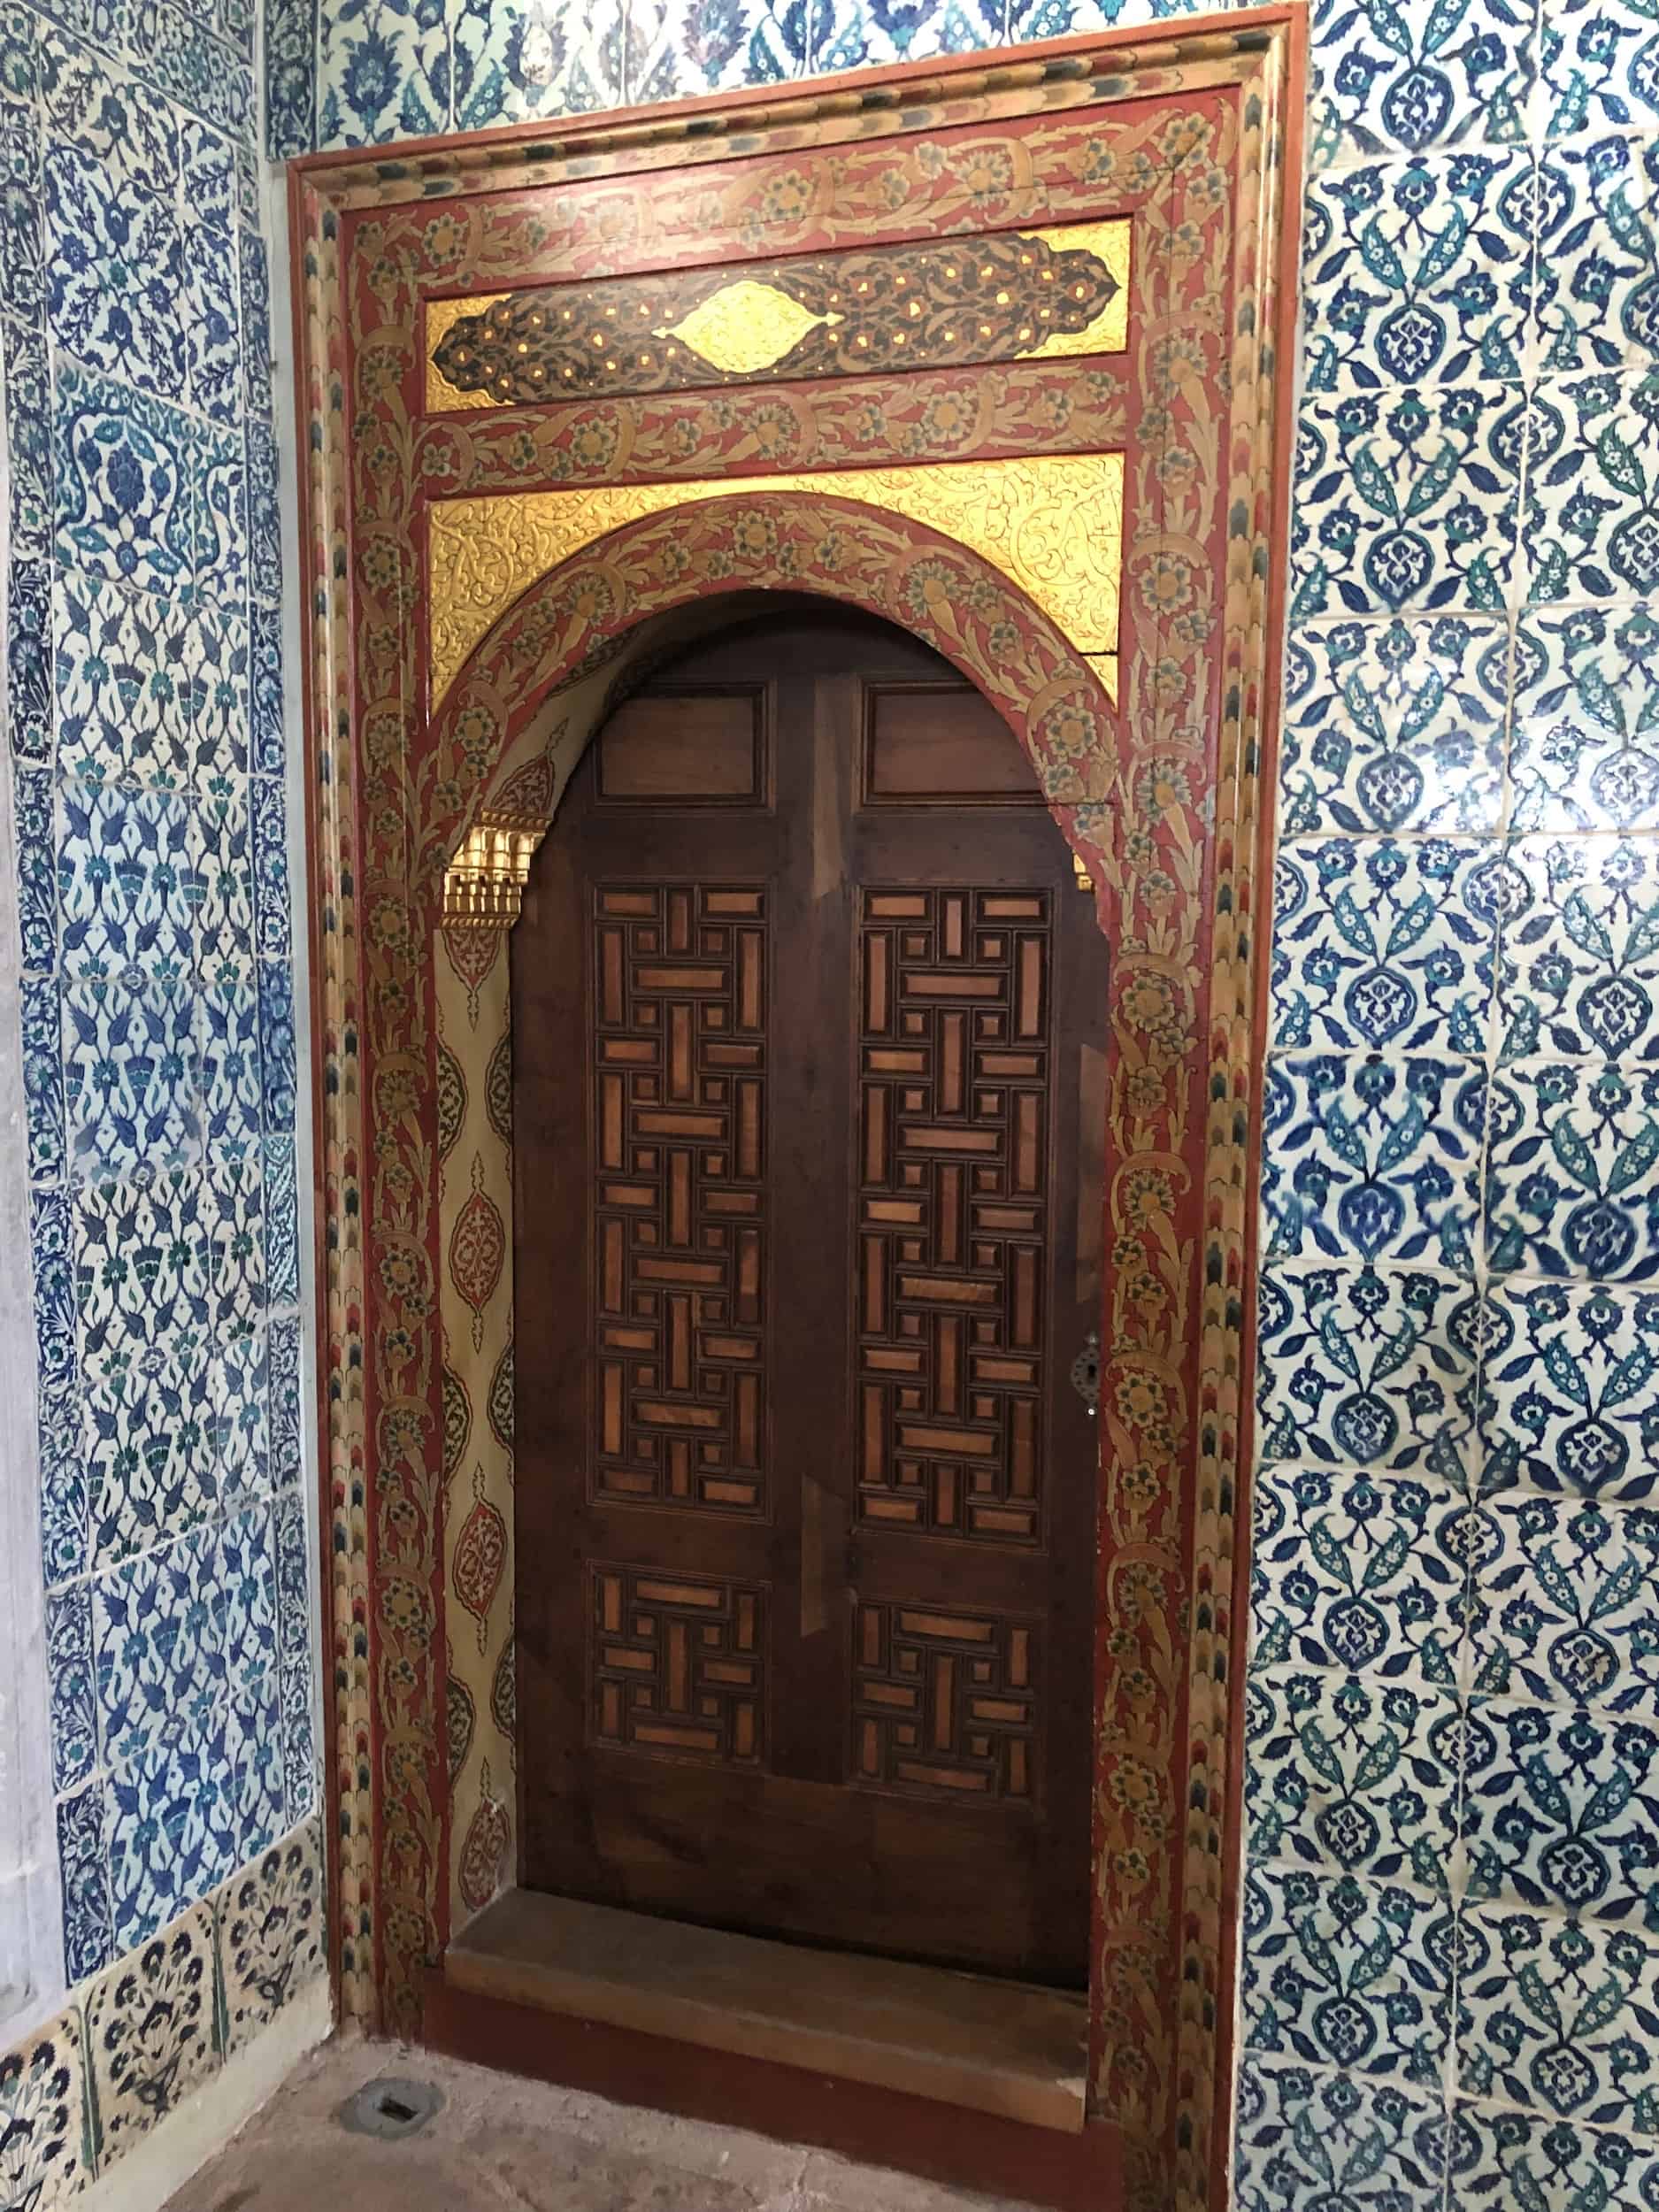 Door at the Sultan's Pavilion at the New Mosque in Eminönü, Istanbul, Turkey